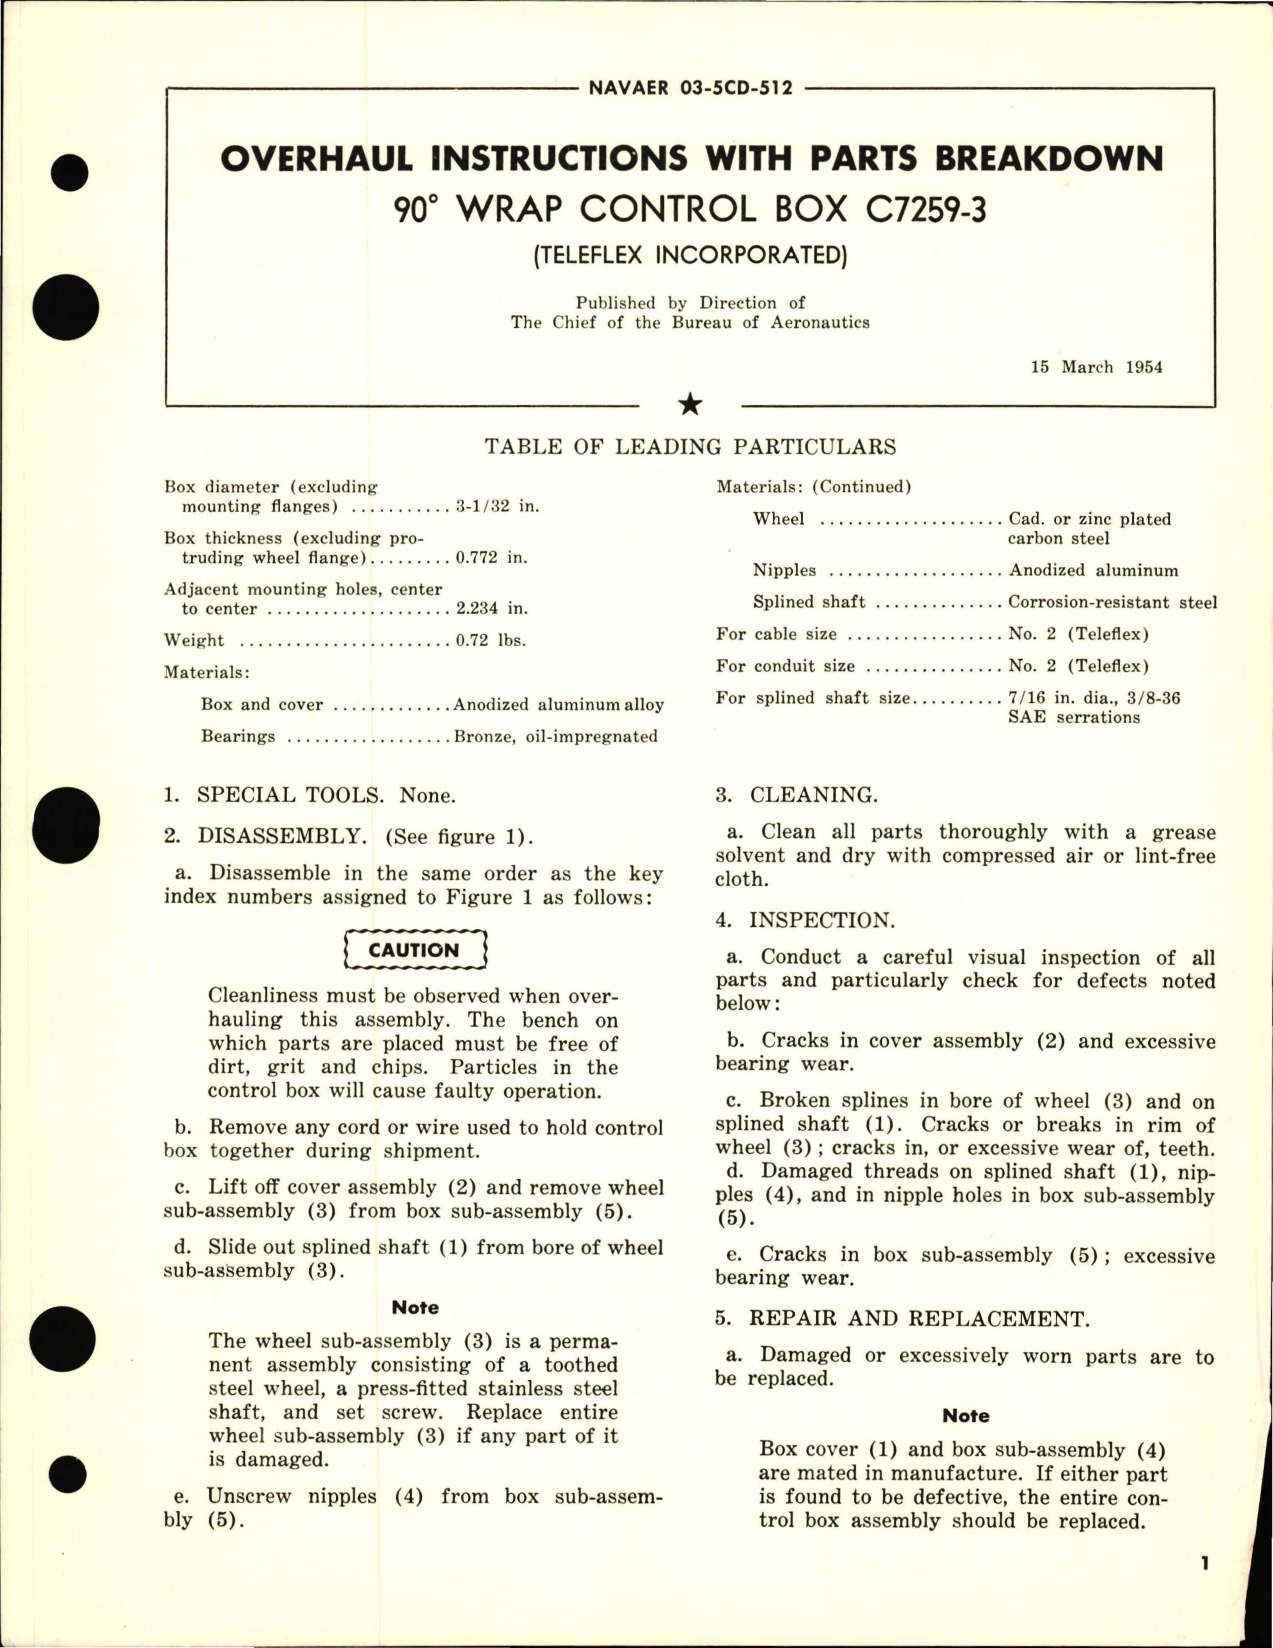 Sample page 1 from AirCorps Library document: Overhaul Instructions w Parts Breakdown for 90 Degree Wrap Control Box C7259-3